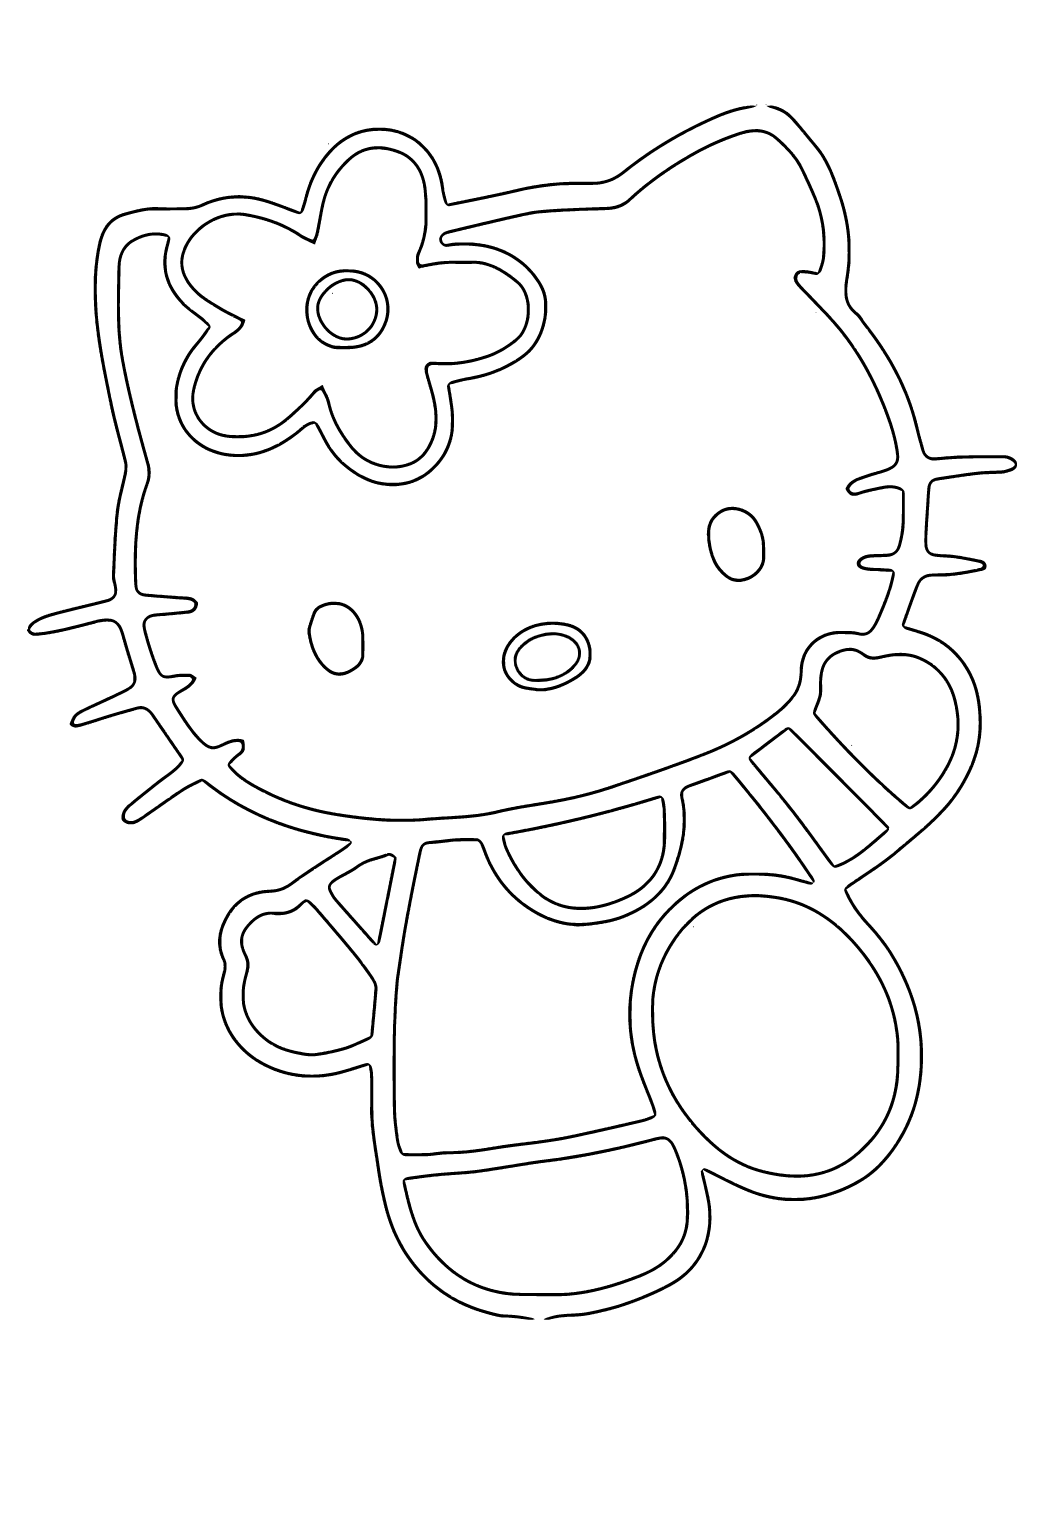 hello kitty alphabet letters coloring pages